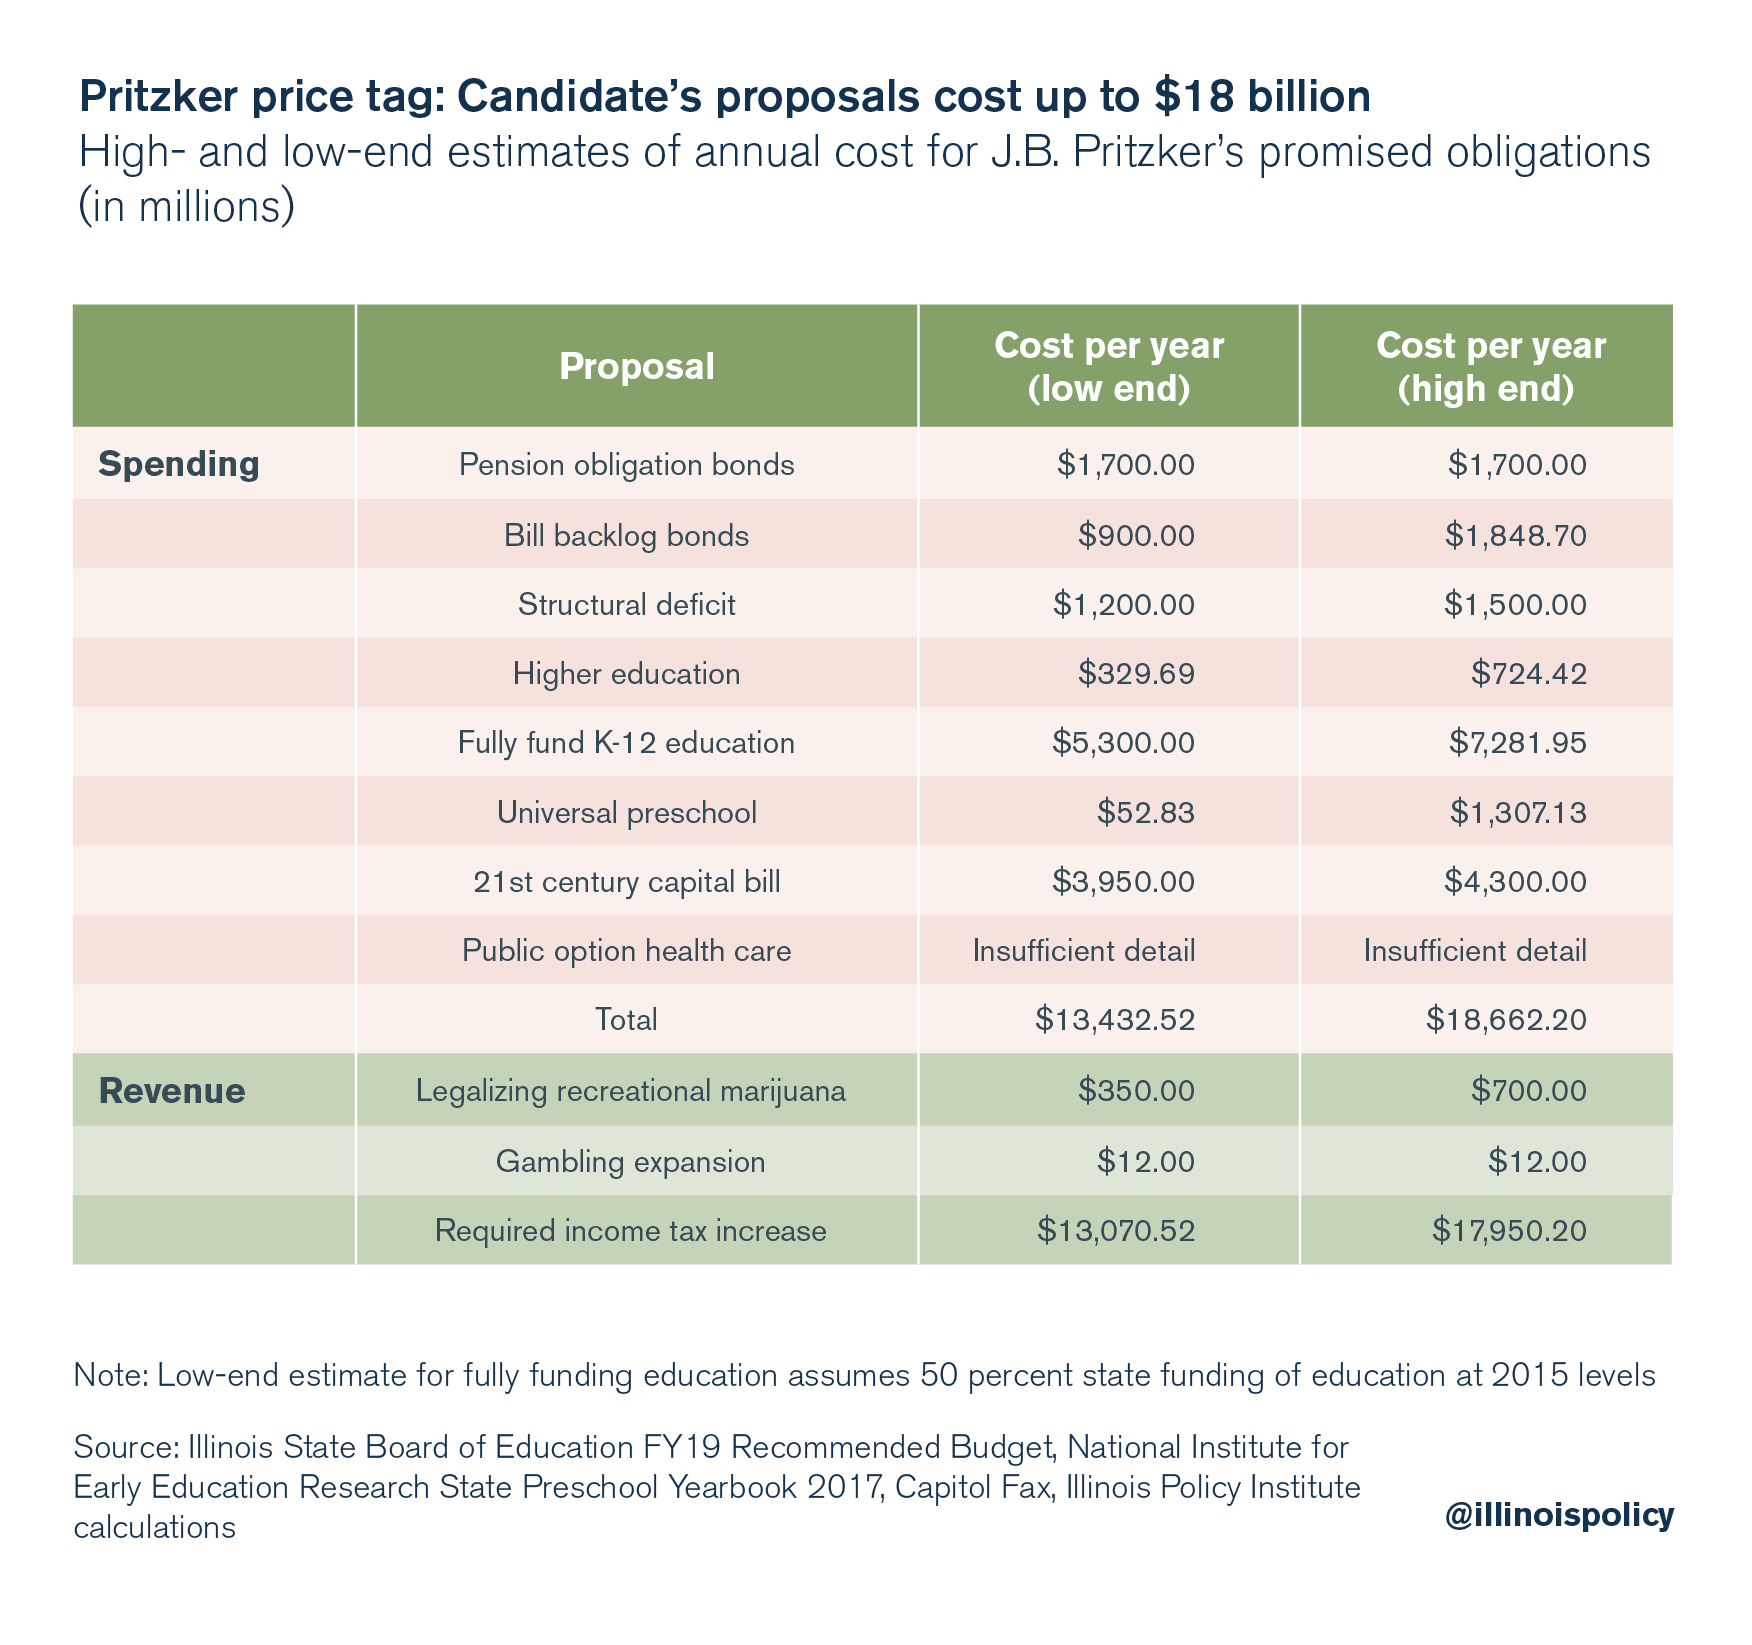 Pritzker price tag: Candidate's proposals cost up to $18 billion